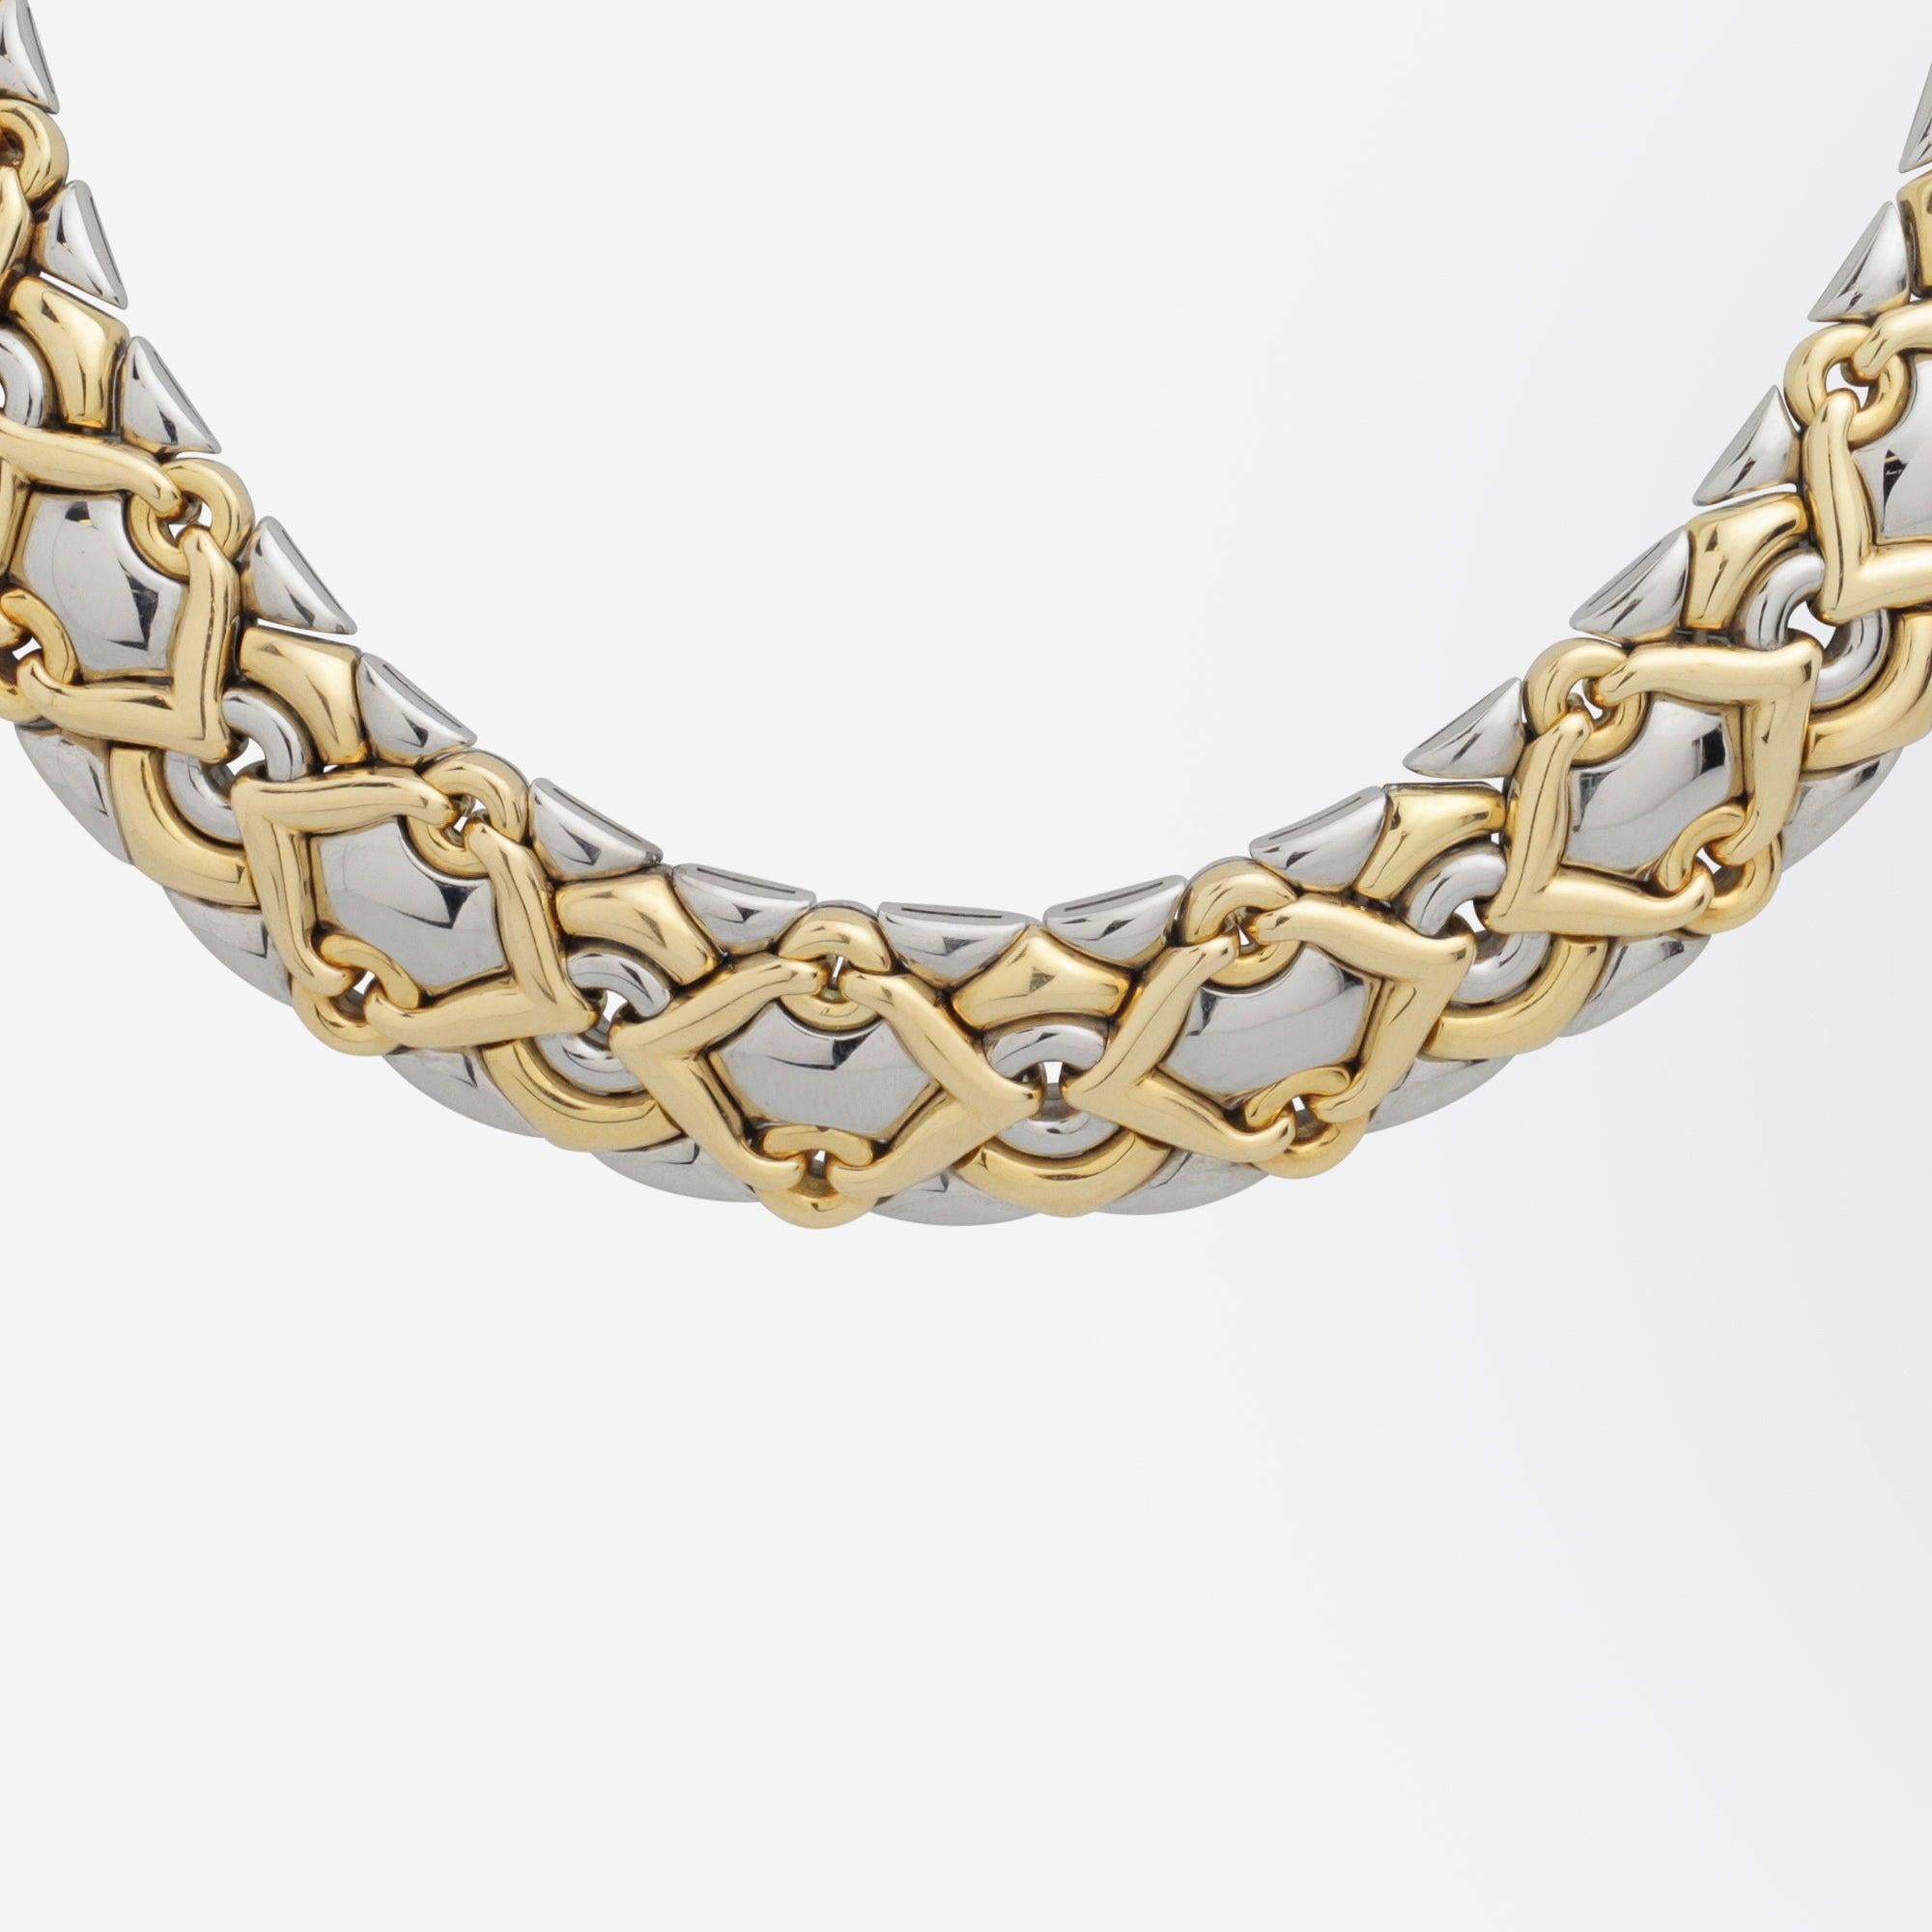 A bold 'Trika' necklet in 18 karat yellow gold and stainless steel by Bulgari. The articulated 'collar' style necklet is a known design called 'Trika' by the famed Italian jeweller and comes in a variety of iterations, from stainless steel to solid